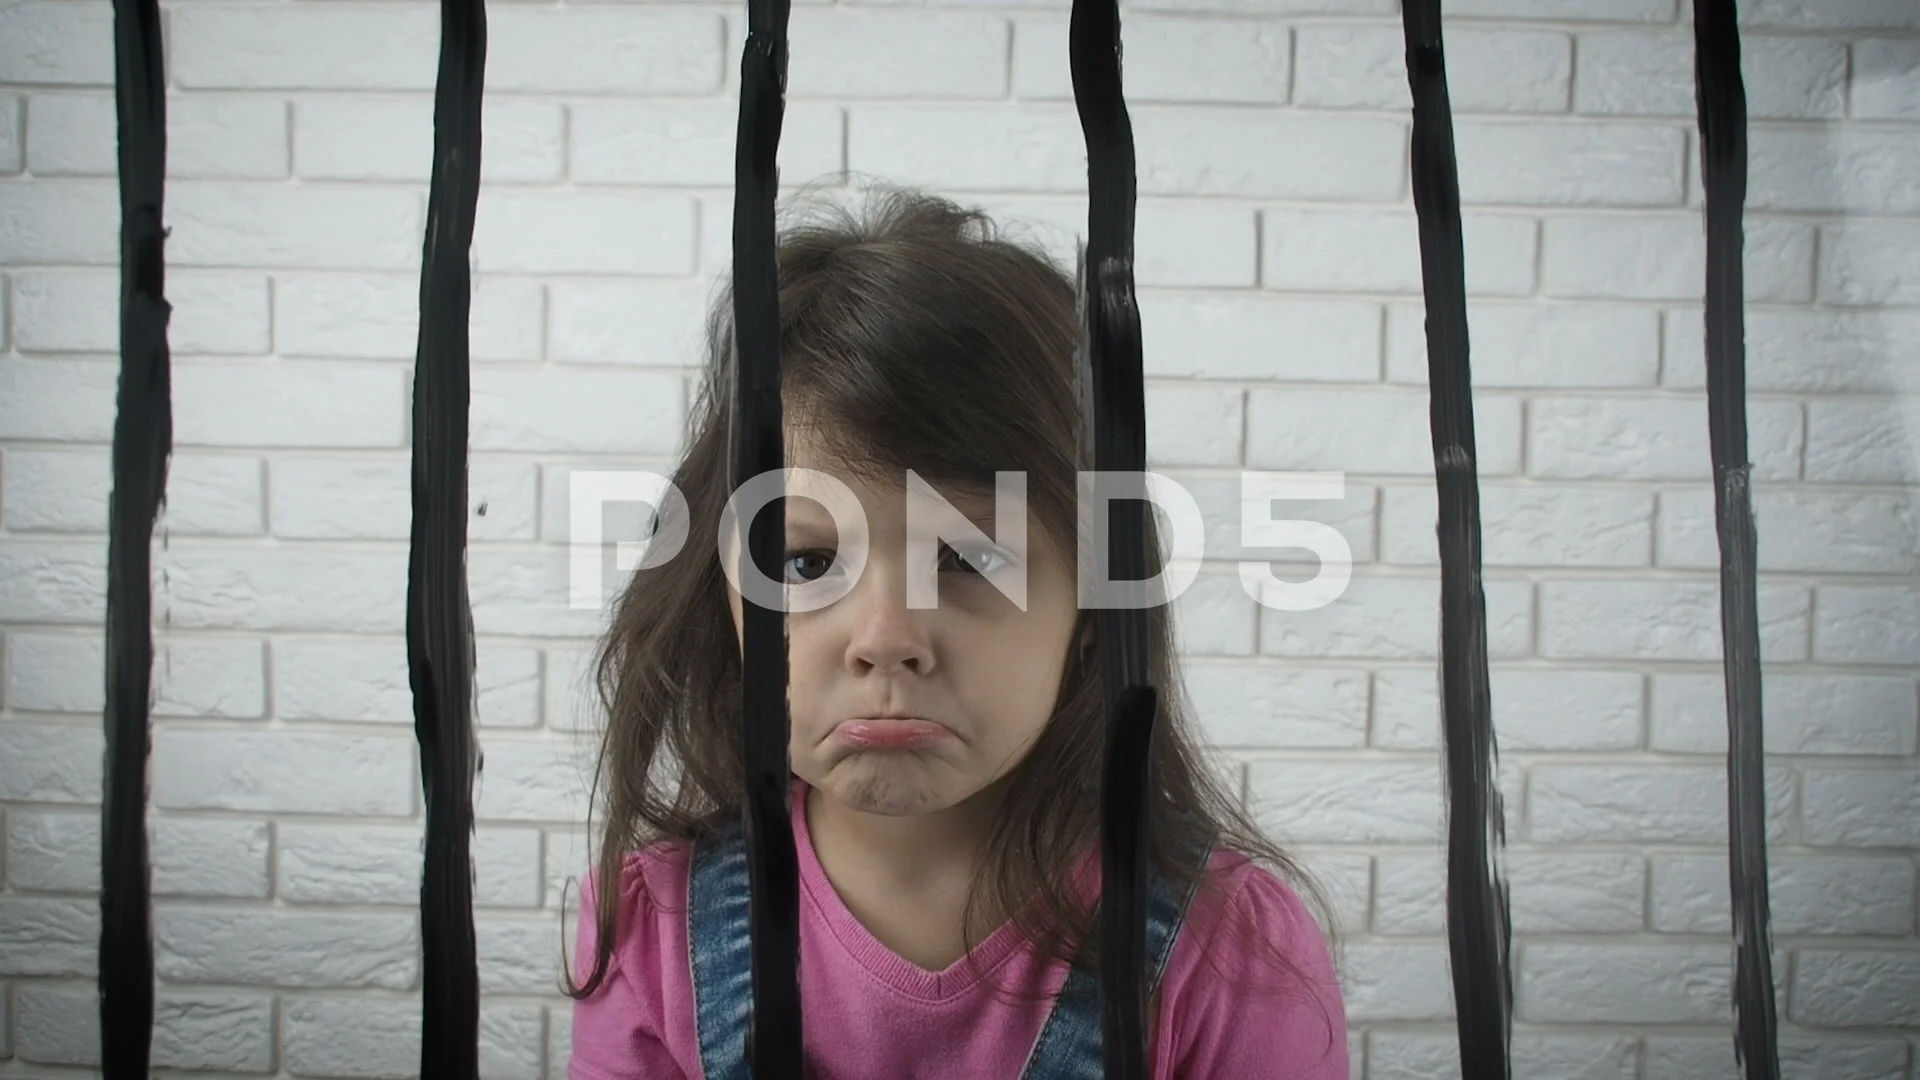 Human Trafficking Stock Footage Royalty Free Videos Pond5 Images, Photos, Reviews